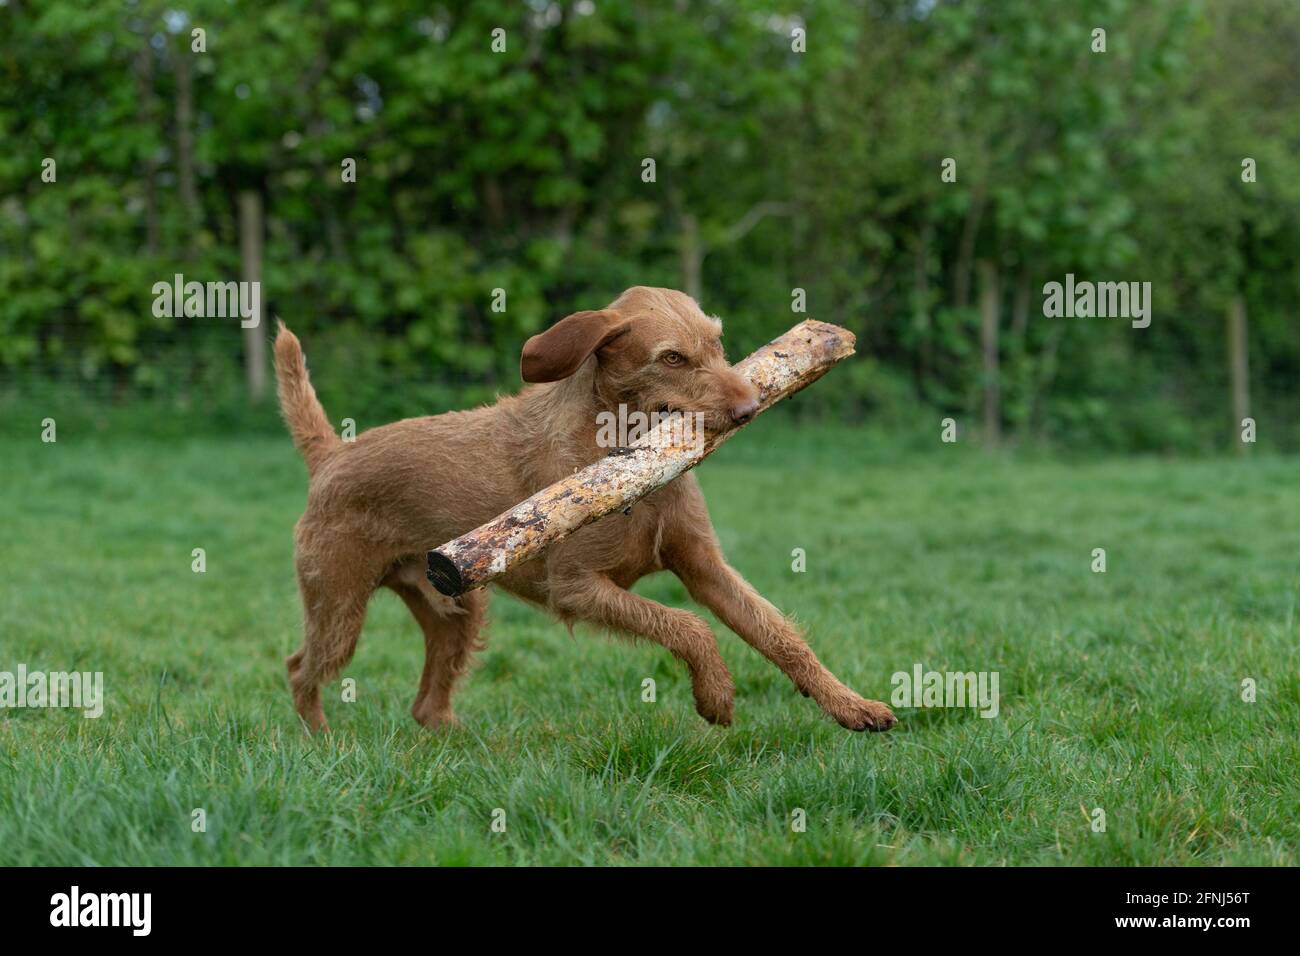 Hungarian Wirehaired vizsla dog carrying a huge stick Stock Photo